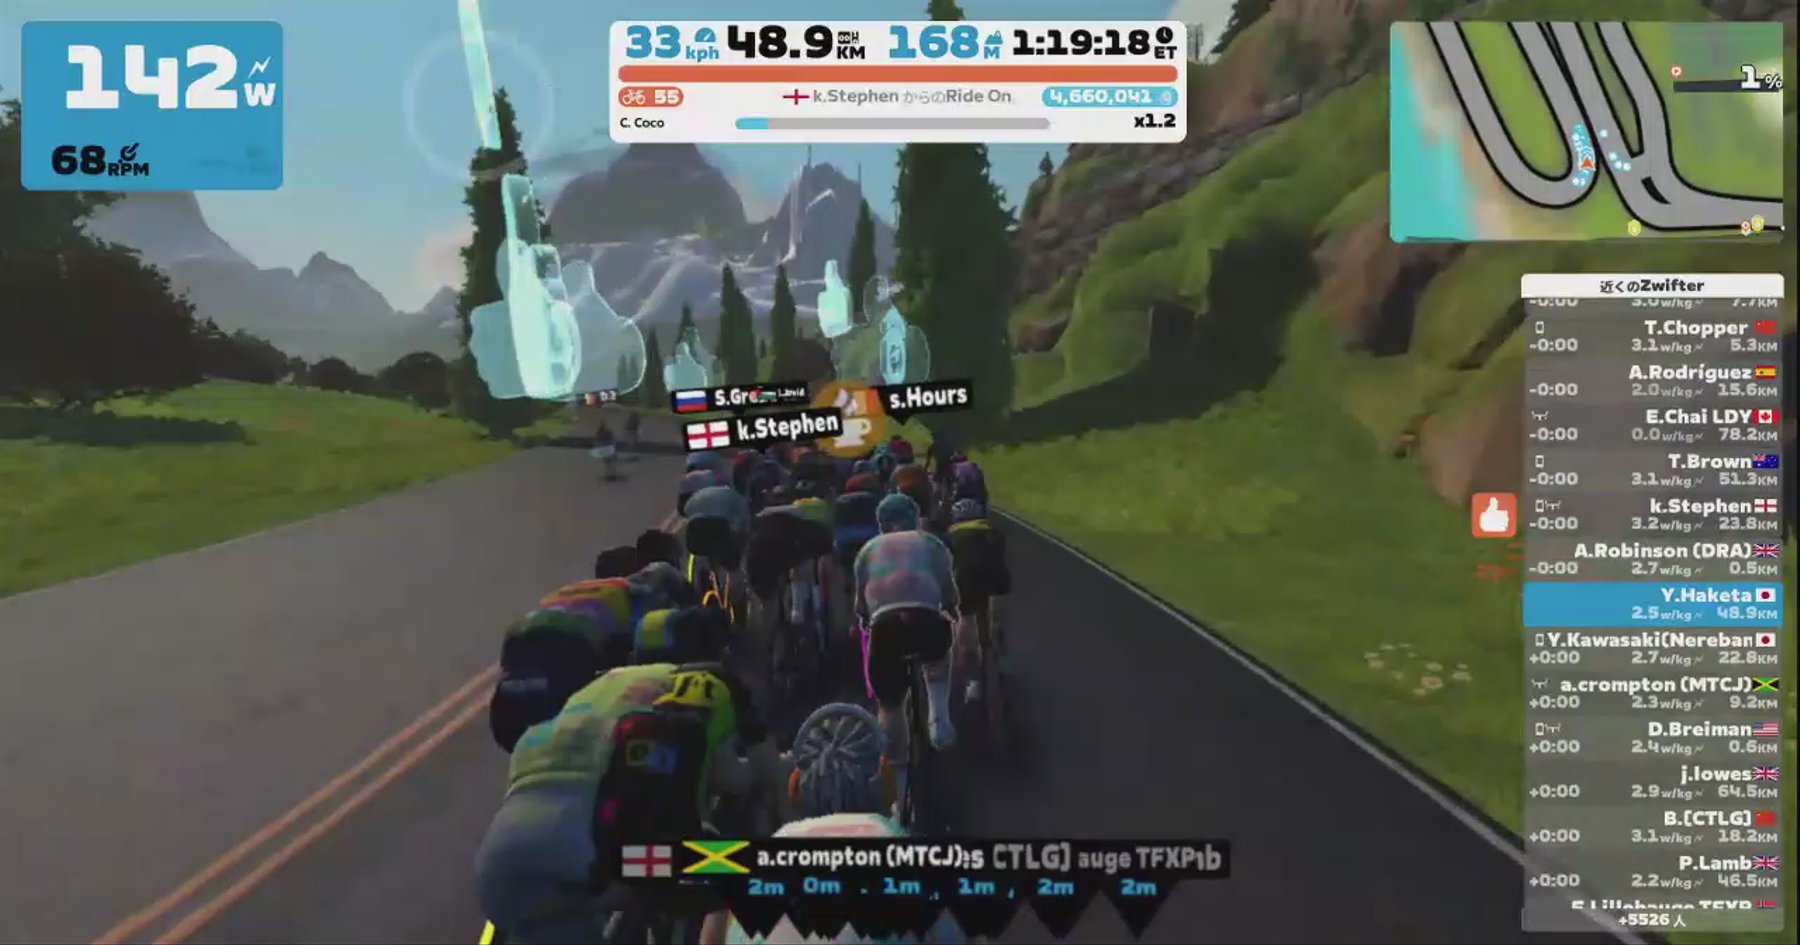 Zwift - Pacer Group Ride: Volcano Flat in Watopia with Maria